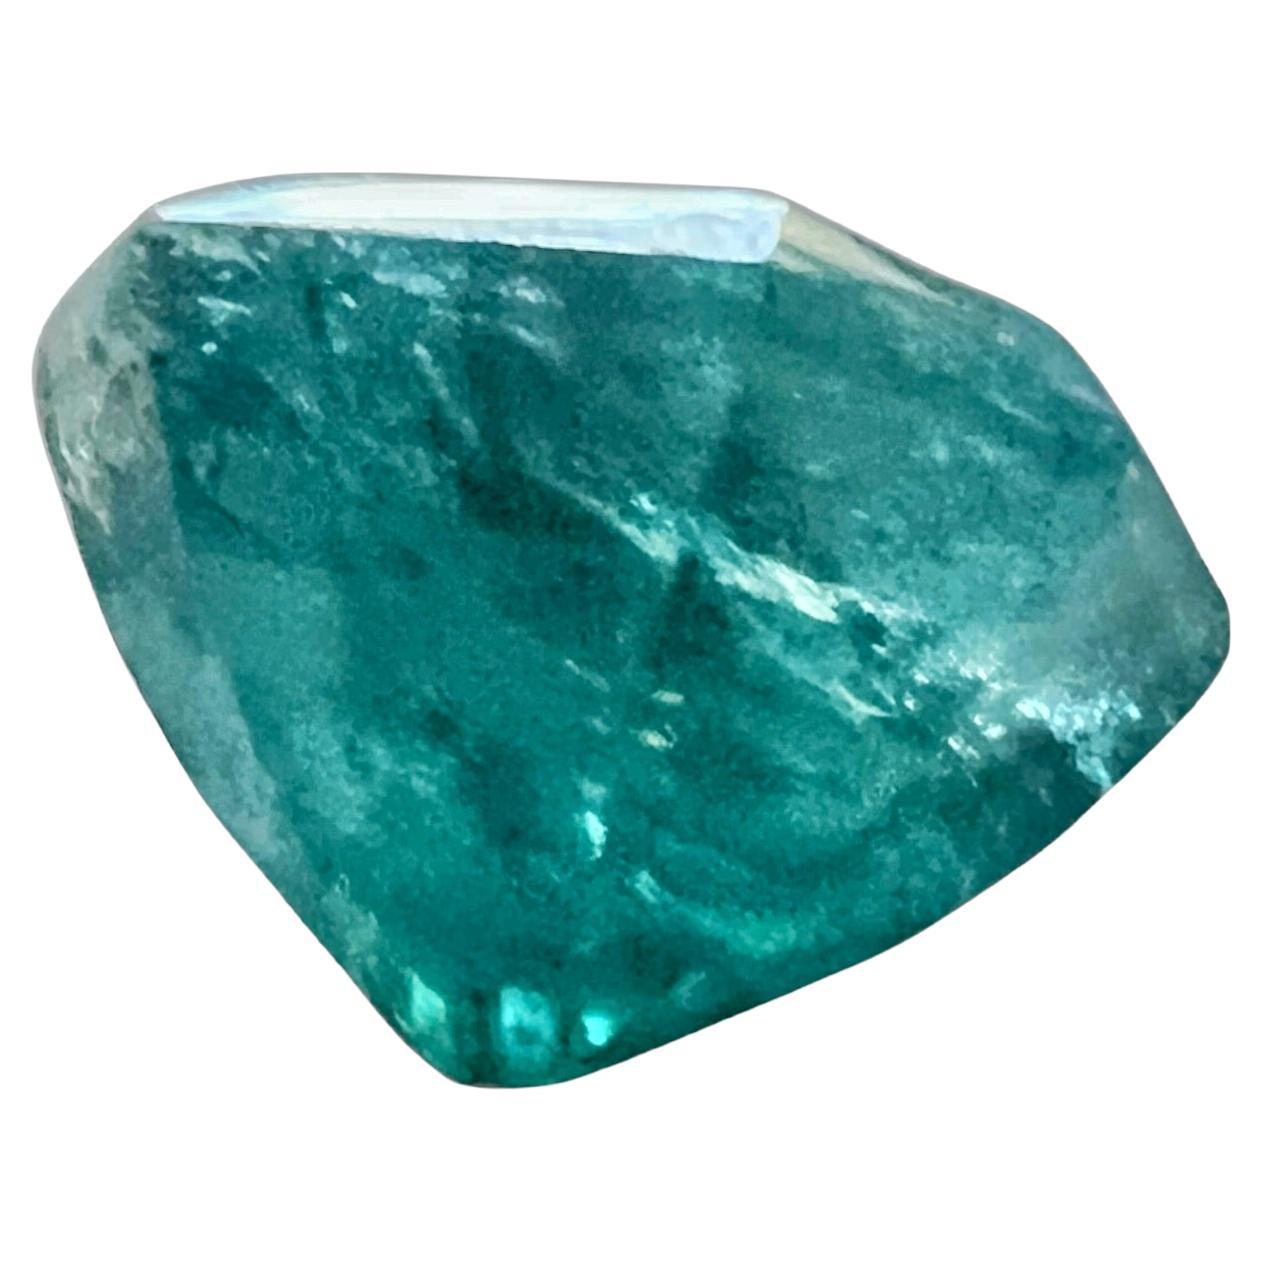 Experience the allure of nature at its finest with this 4.55ct Octagonal Cut No-Oil 100% Natural Untreated Emerald Gemstone. This extraordinary gemstone encapsulates the essence of authenticity, featuring a mesmerizing color, clarity, and size